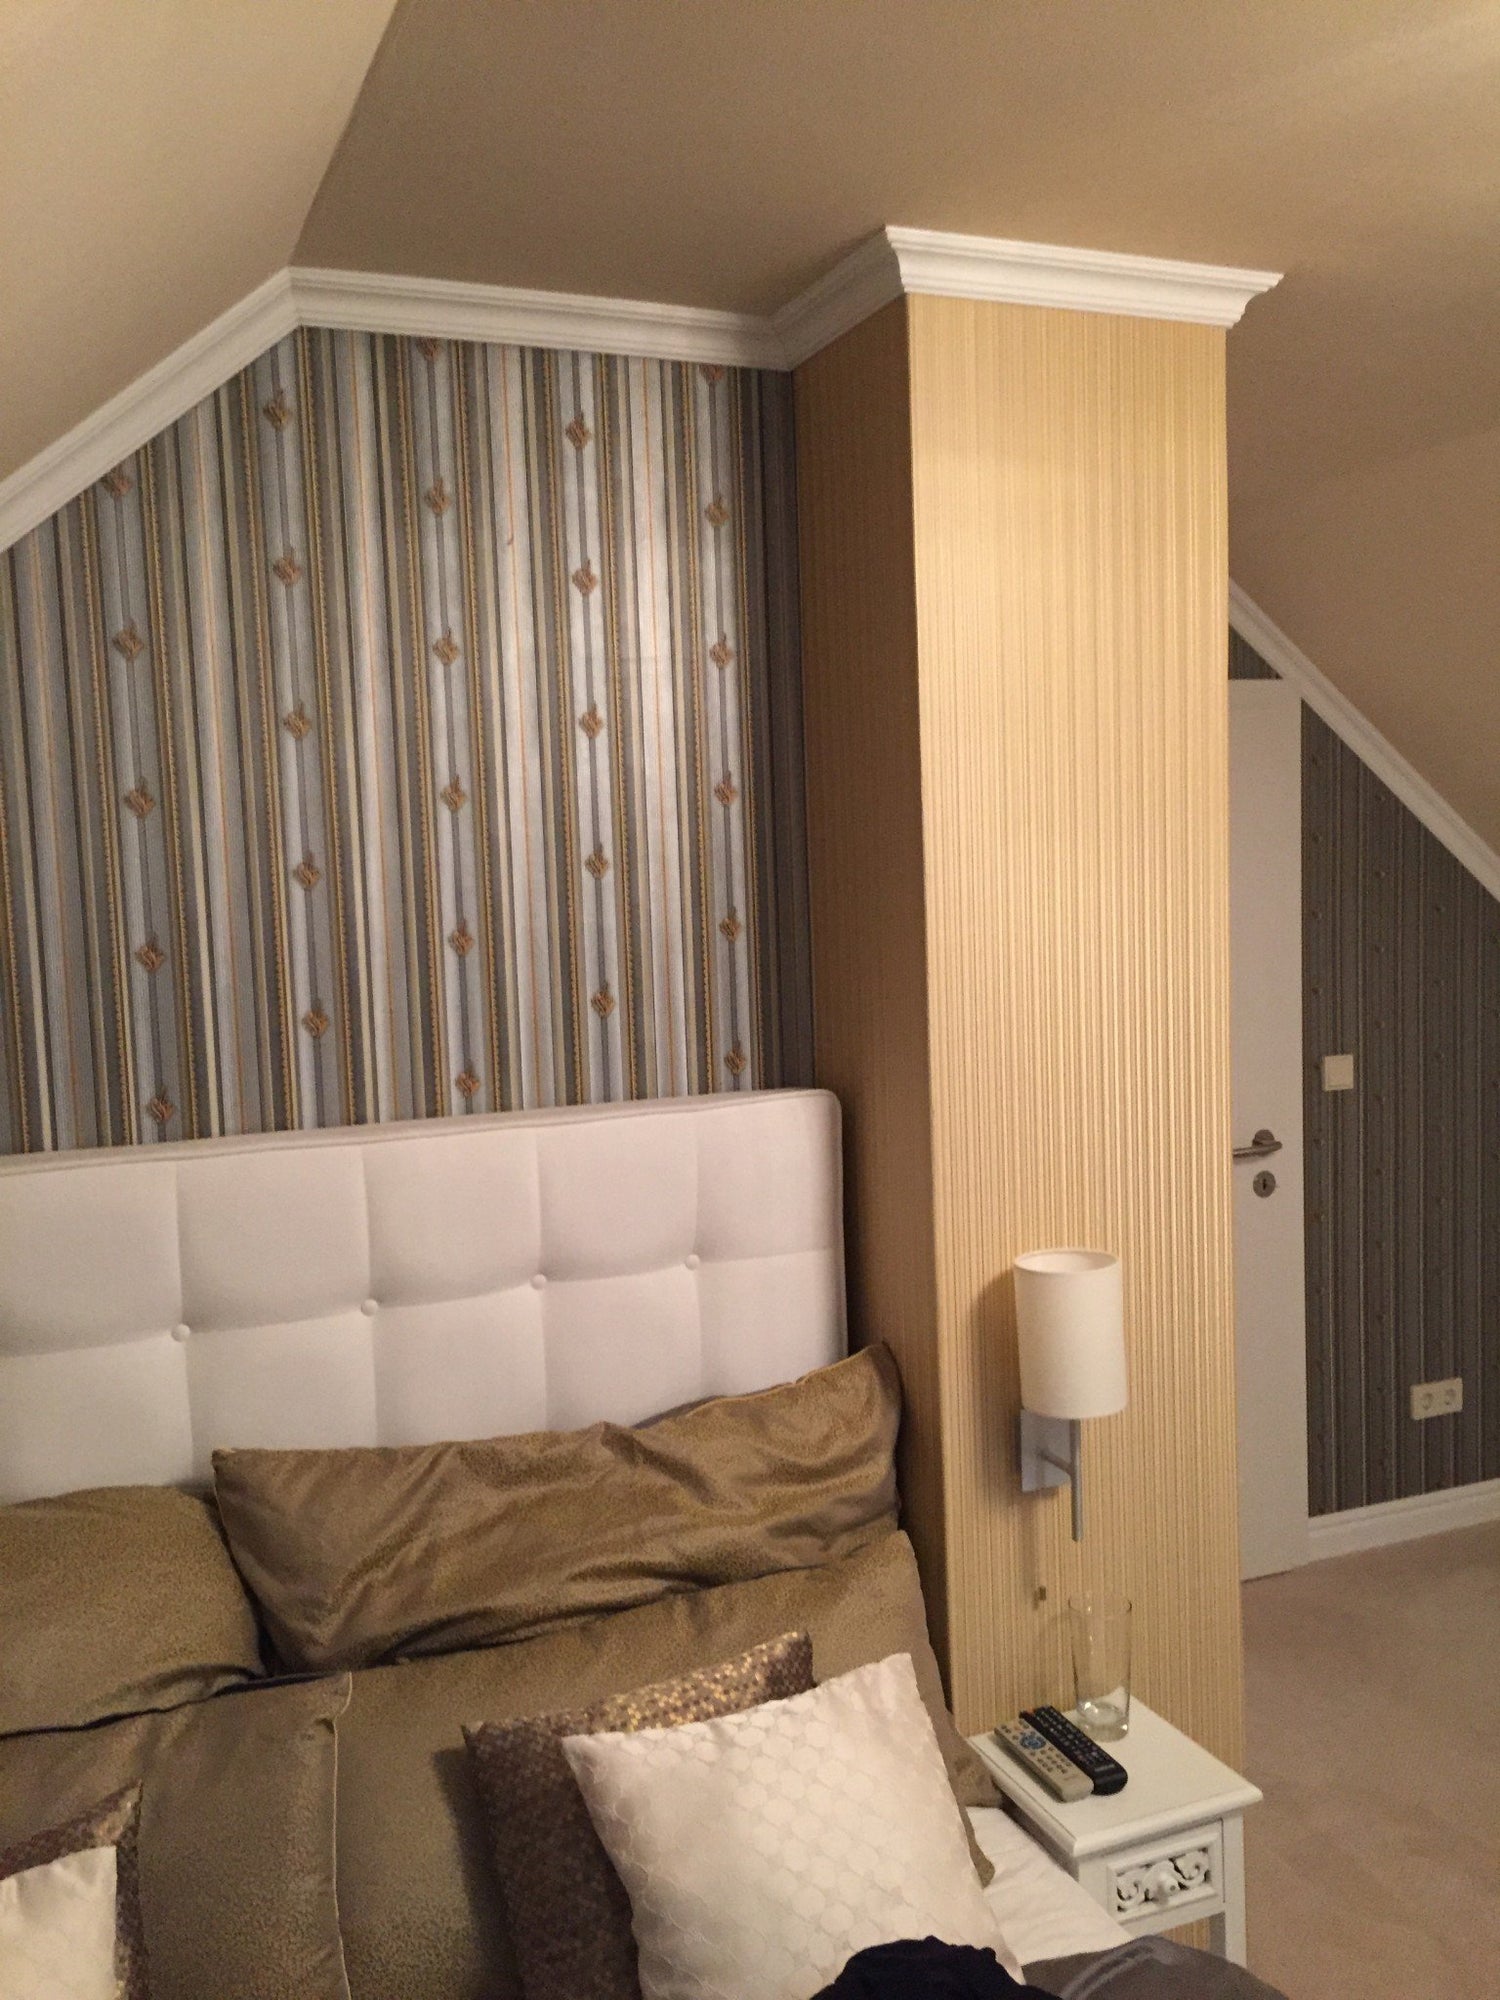 Orlando - Lightweight Coving in a room with a coffee colour pattern